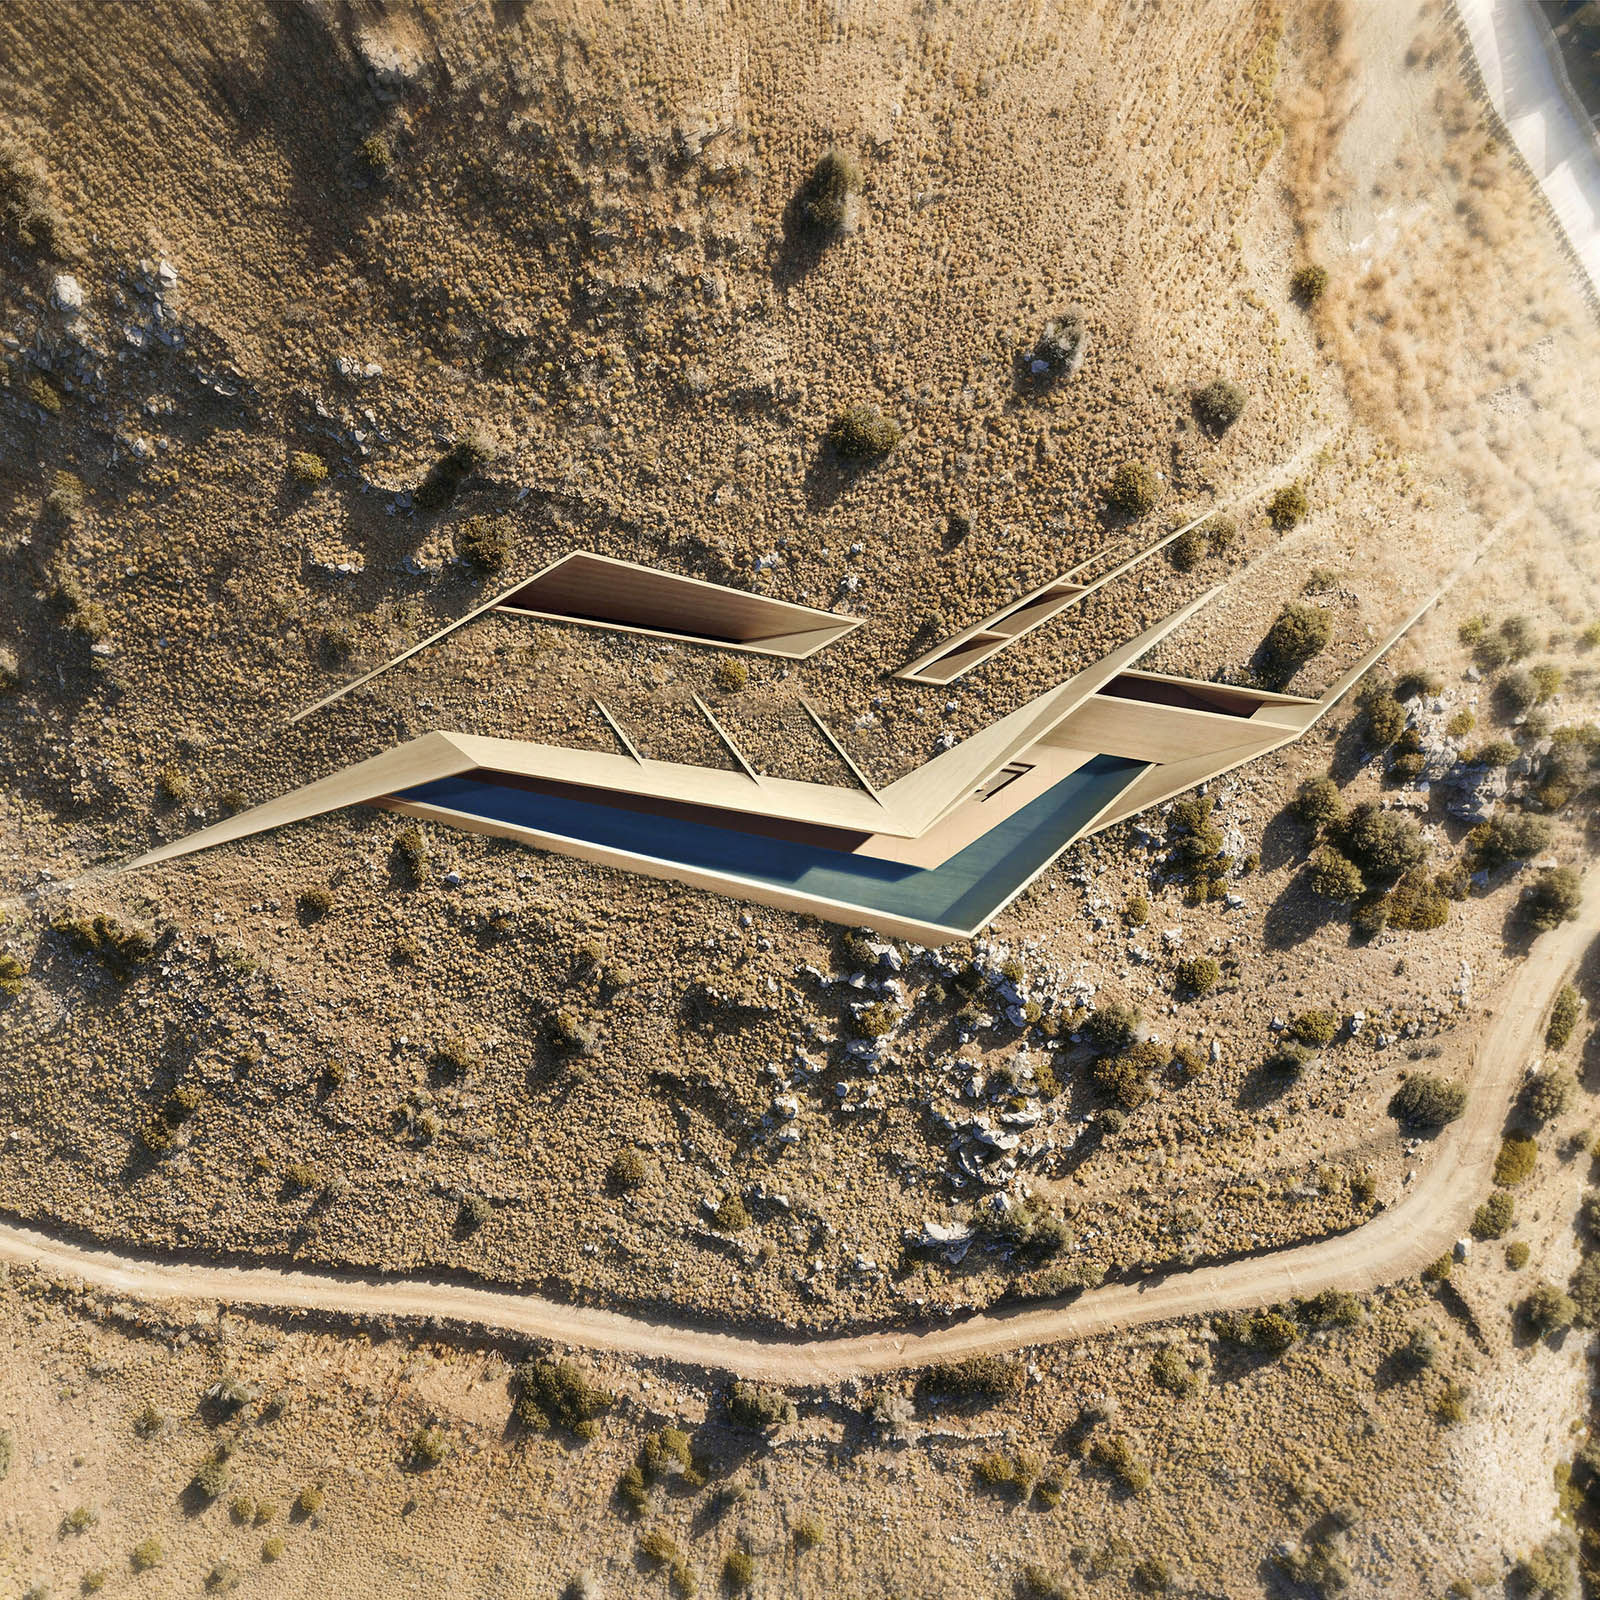 Archisearch Casa Katana, A crooked line engraved in the Southern Cretan landscape | by KRAK architects